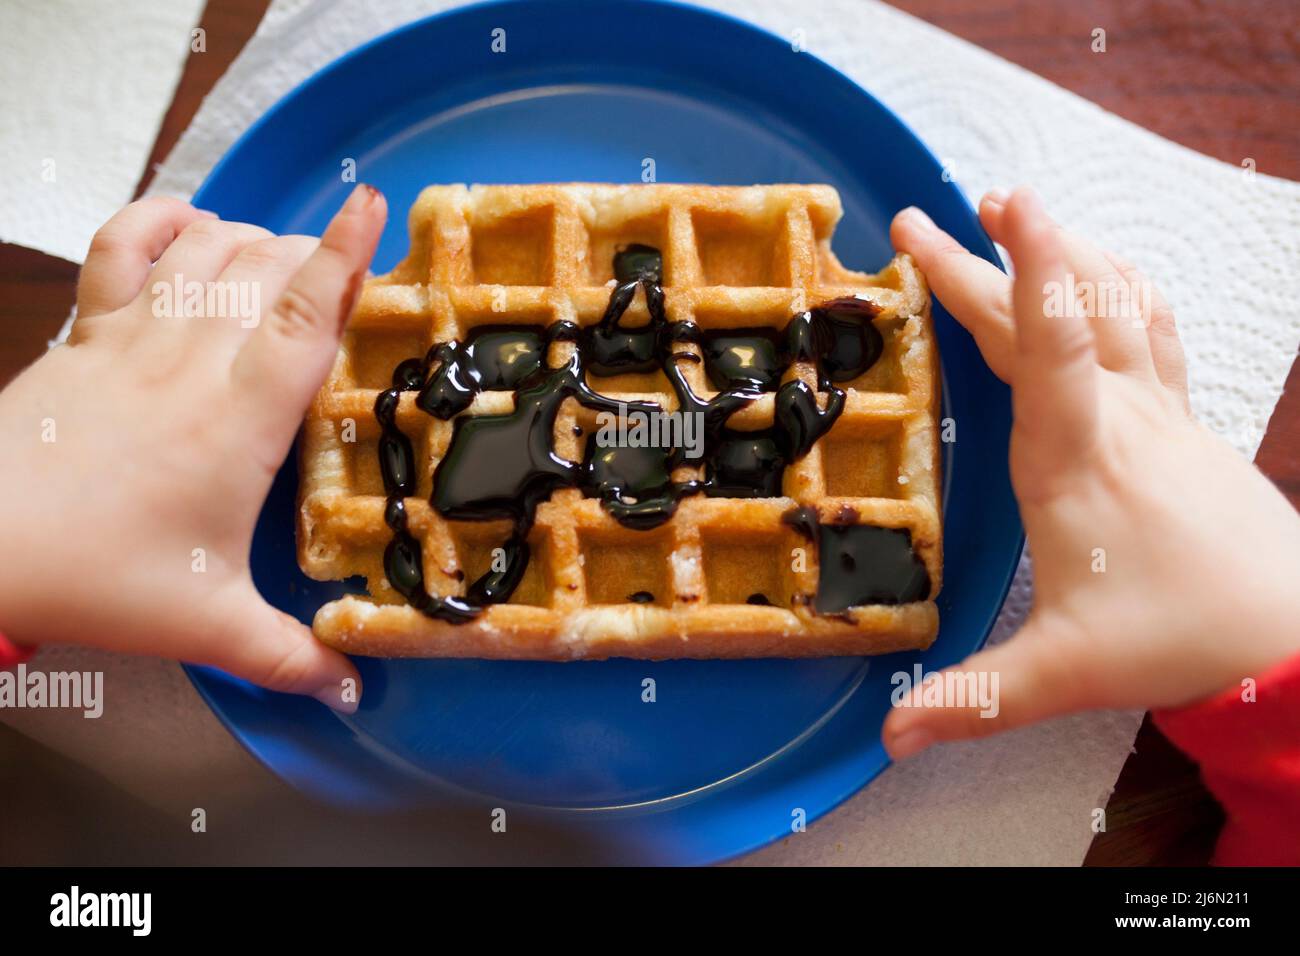 Child holds a waffle over blue plate. Waffled is filled with chocolate syrup. Stock Photo